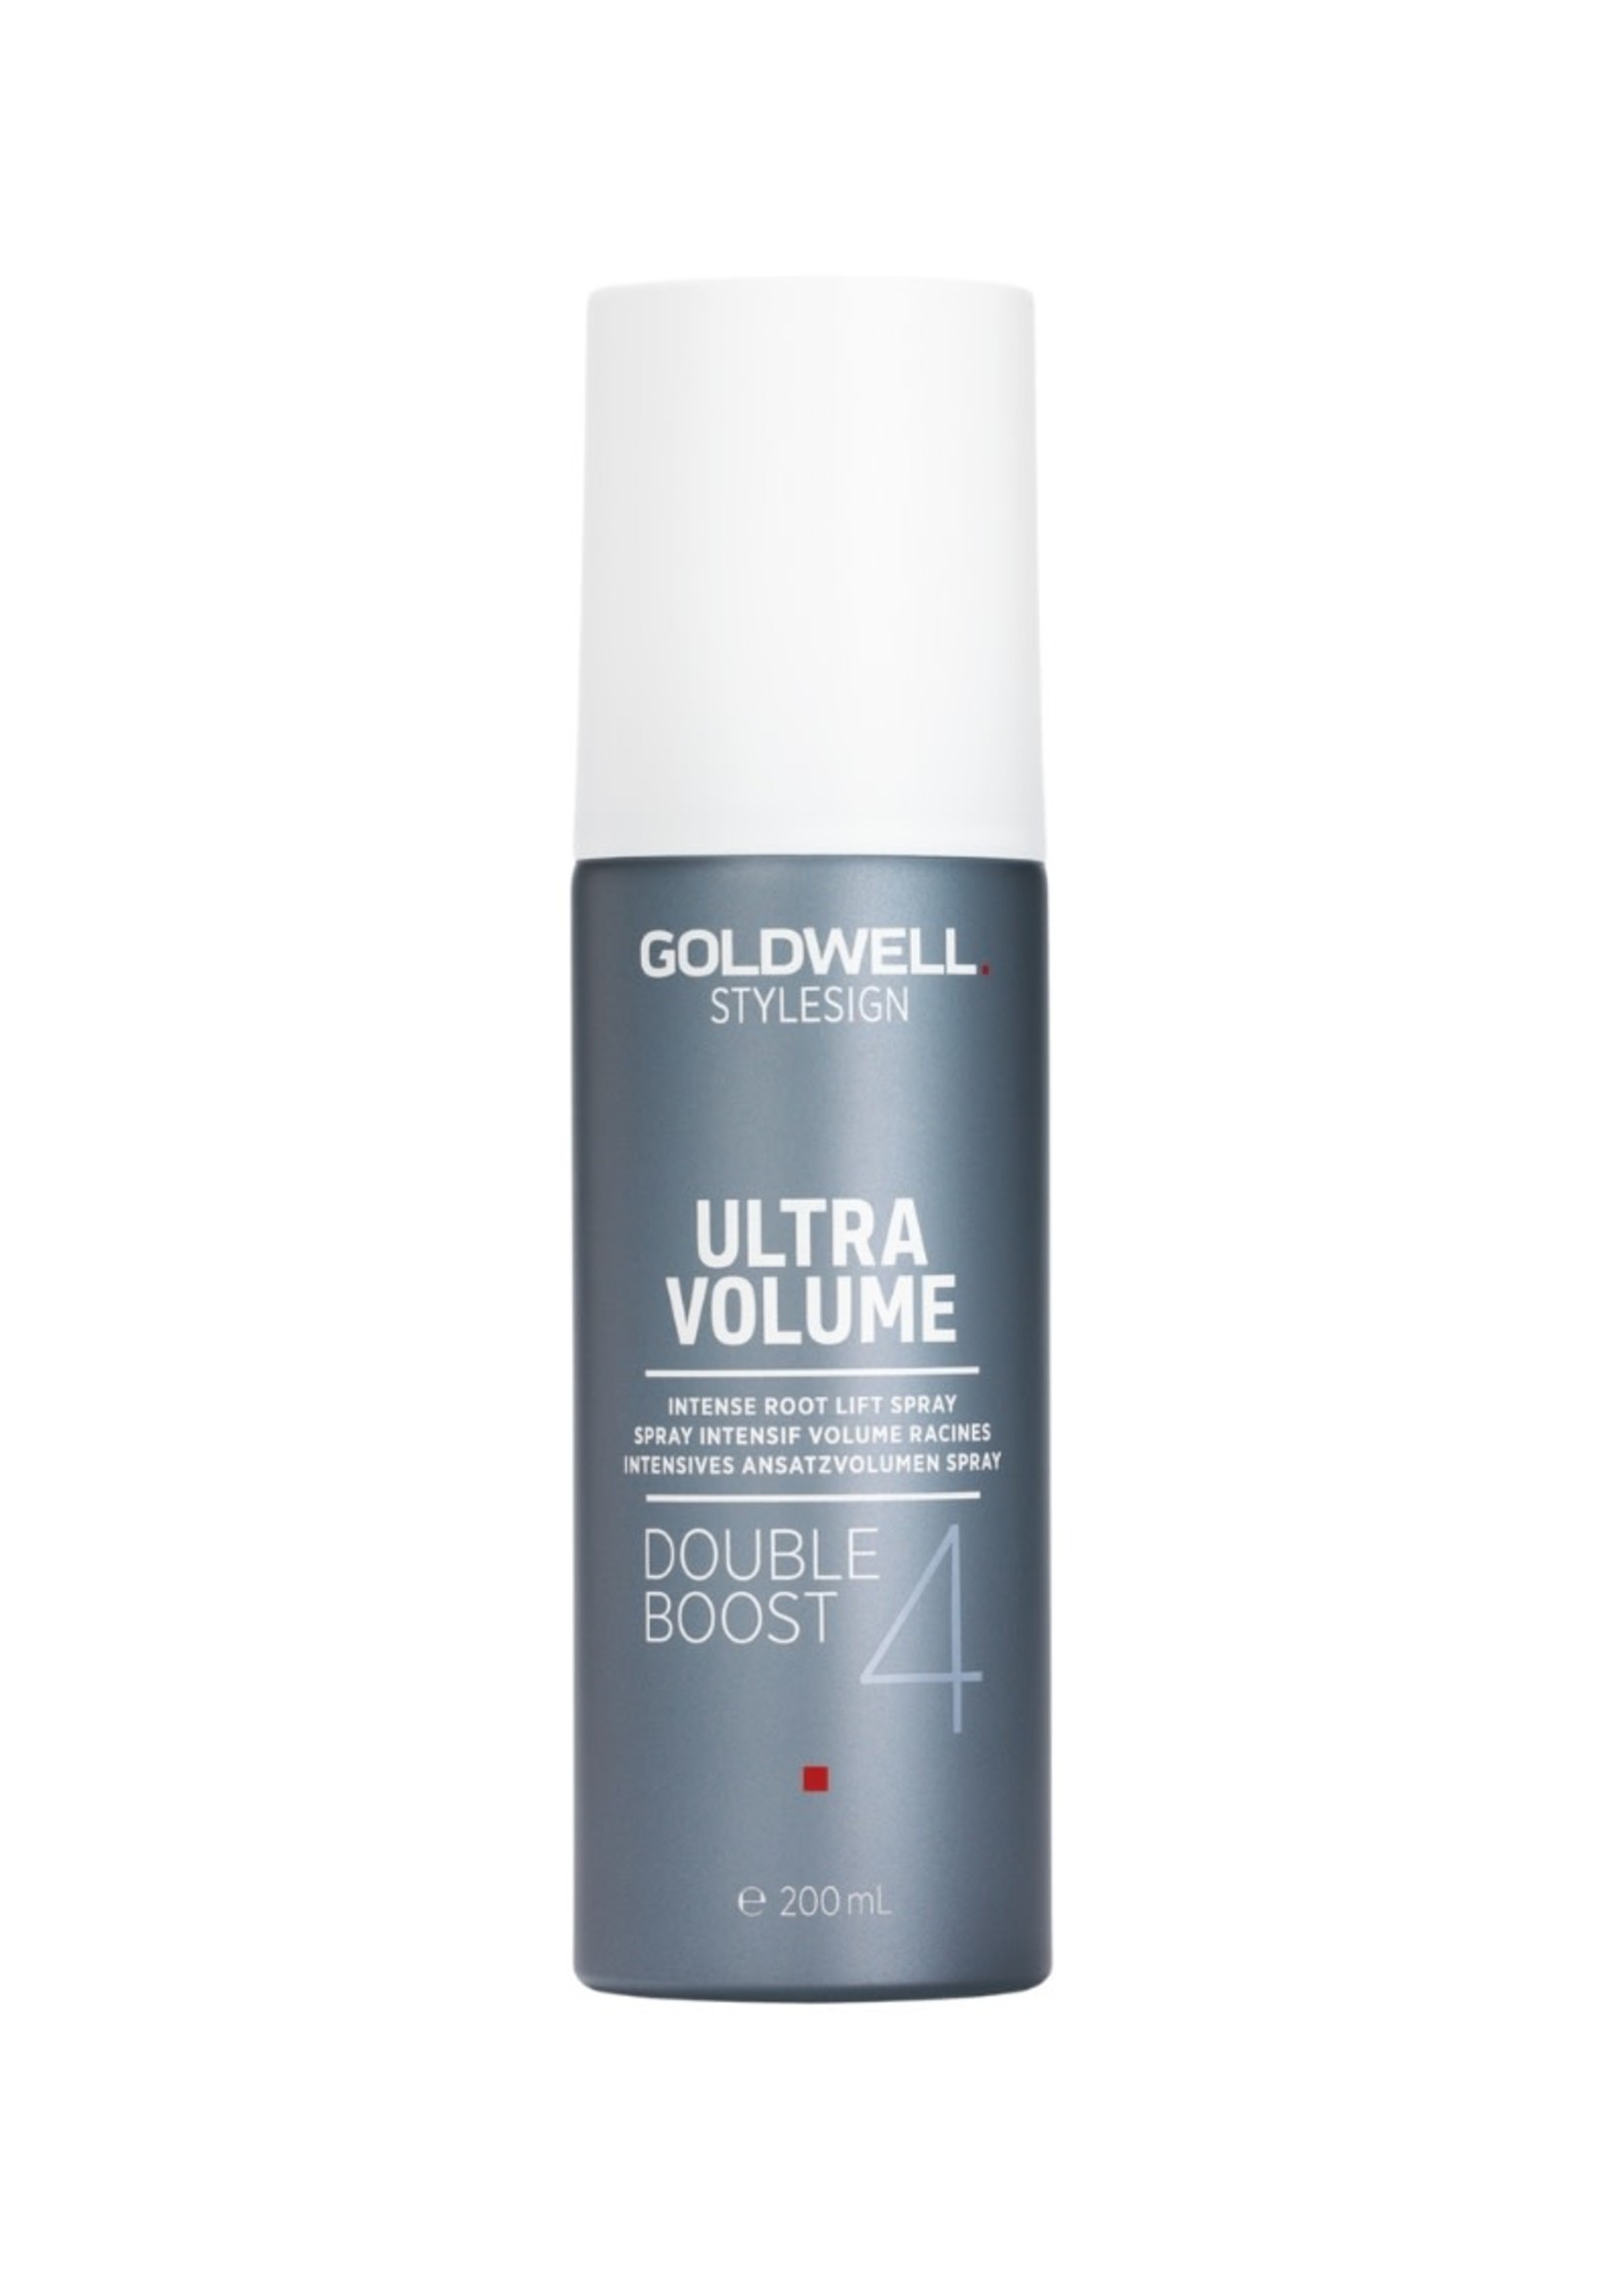 Goldwell Goldwell Stylesign Ultra Volume Double Boost 200ml